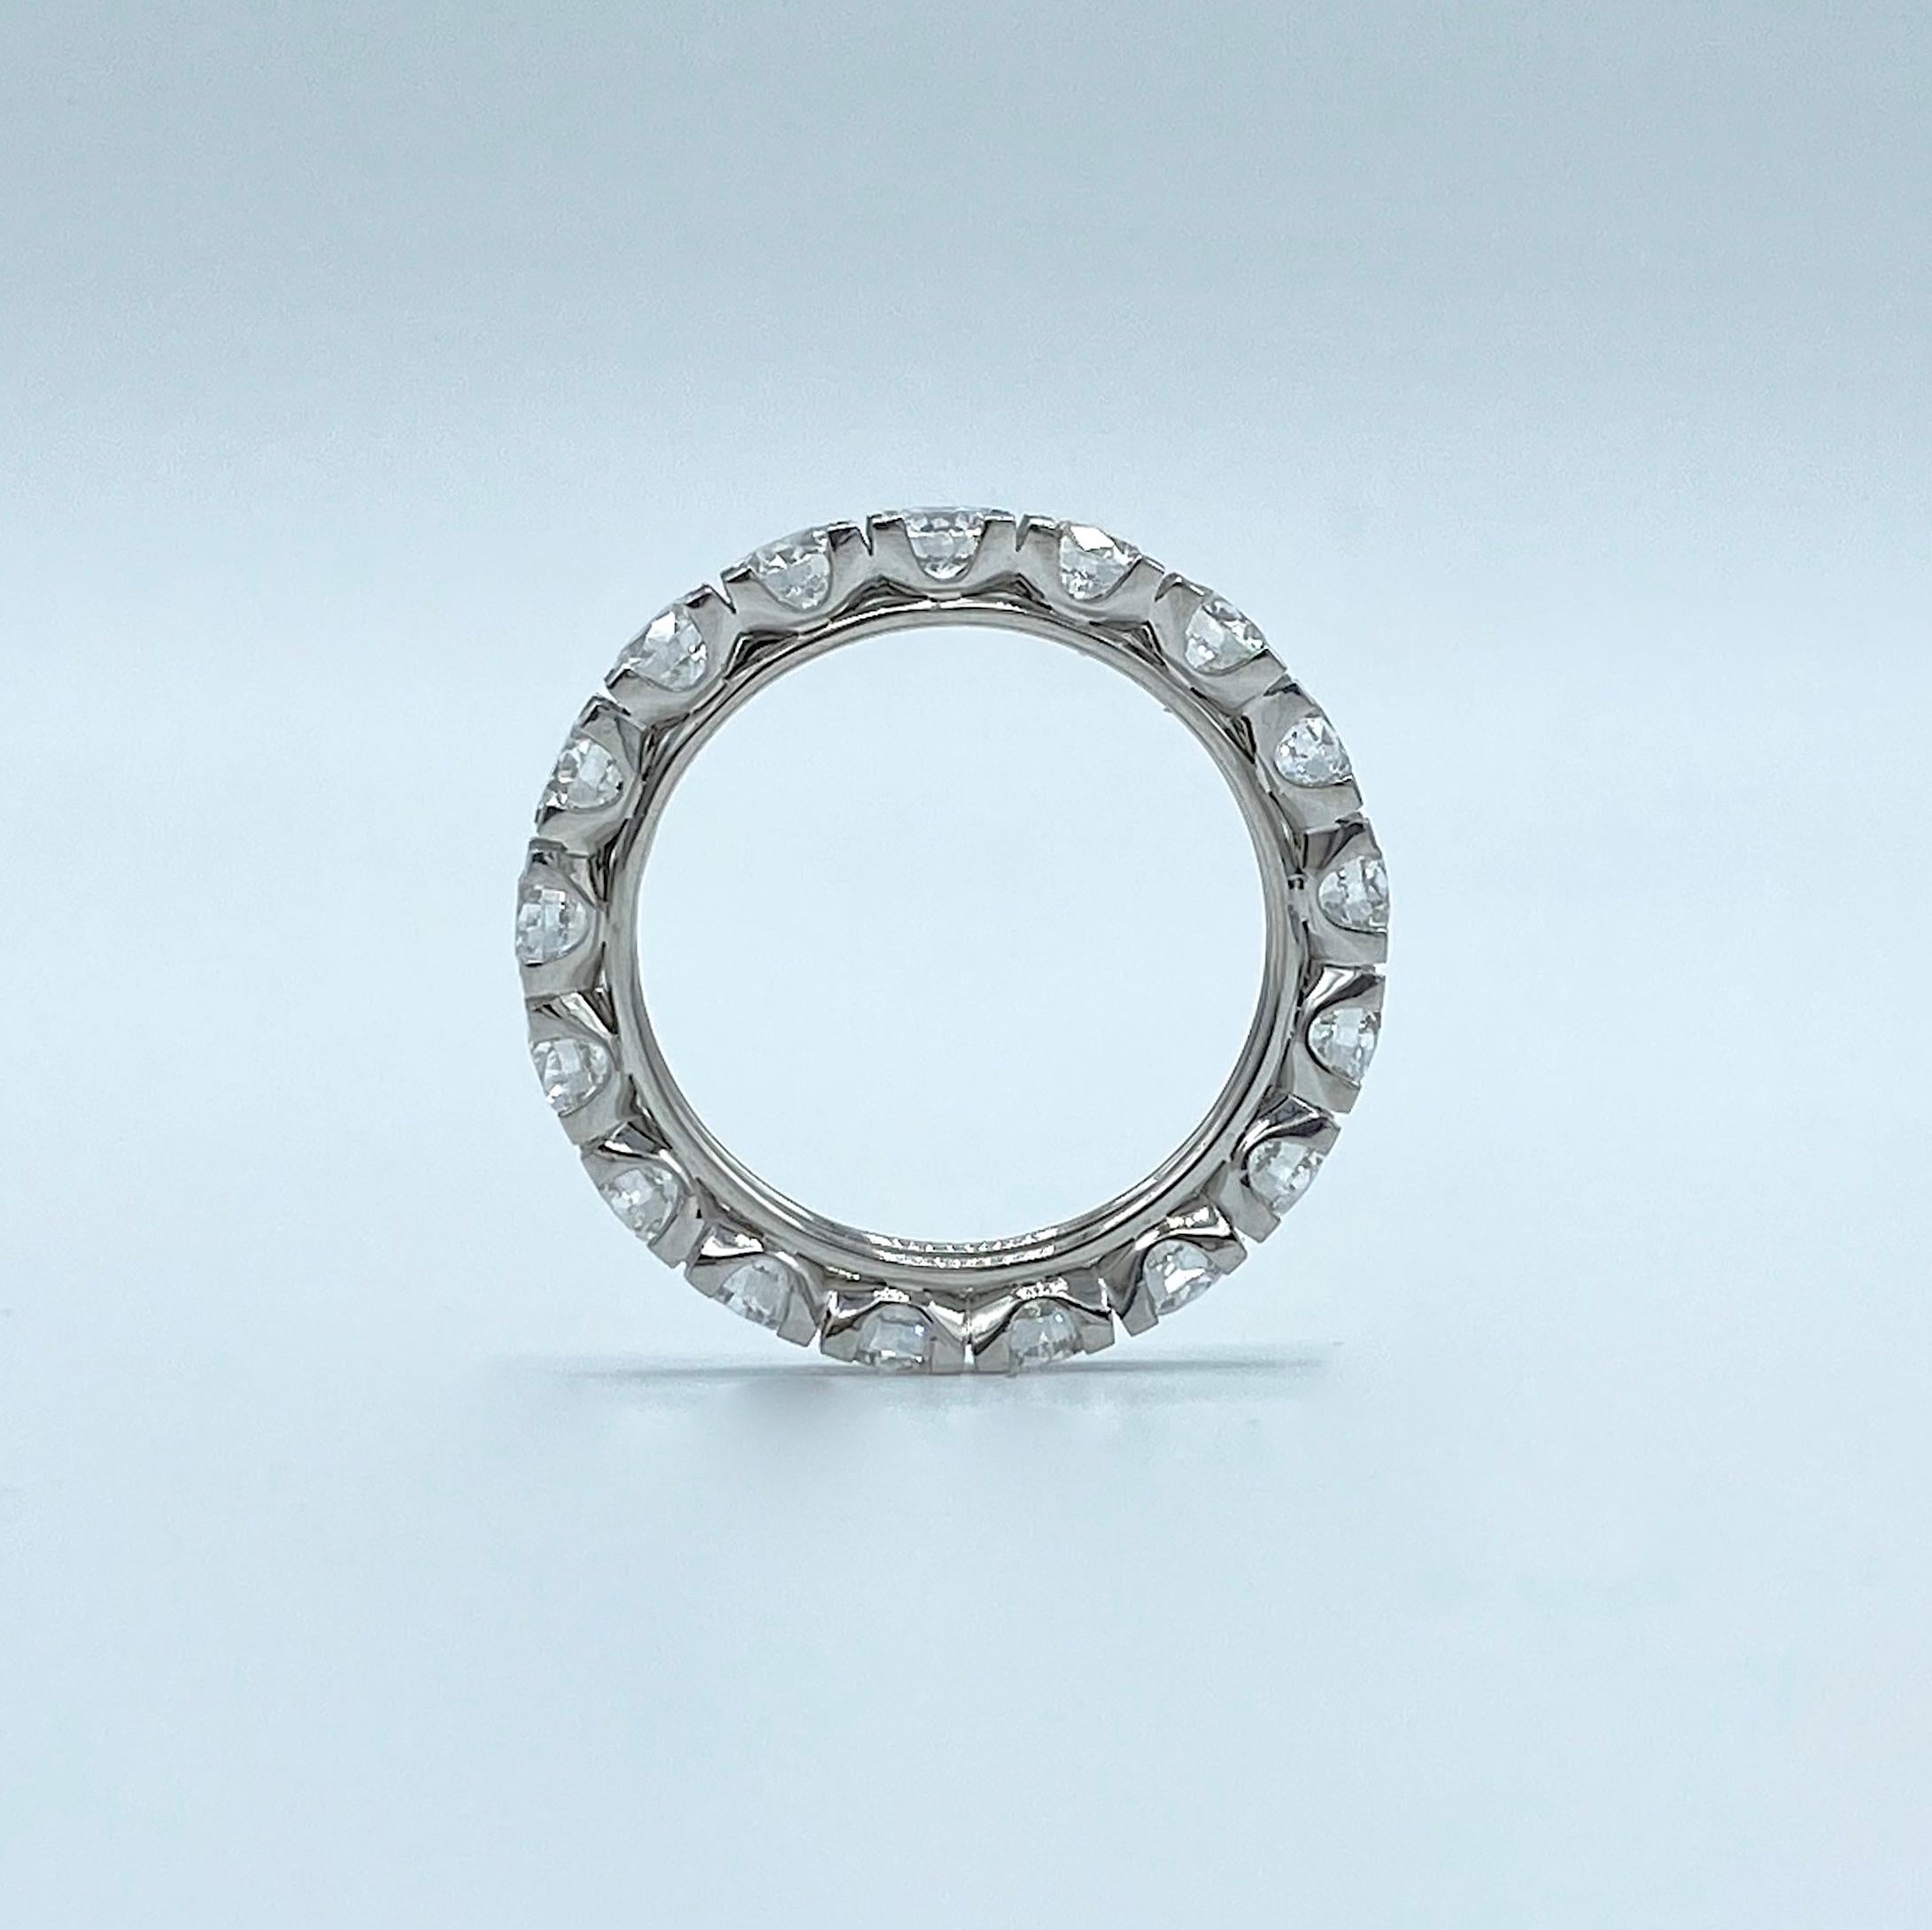 3.00 ct White Diamond Platinum Band Eternity Ring Made in Italy
This platinum eternity ring is set by 17 stones. They are in total ct 3.01, quality F/G VS. 
The size of the ring is EU 52 - US 6.

This ring is customizable, price may vary depending